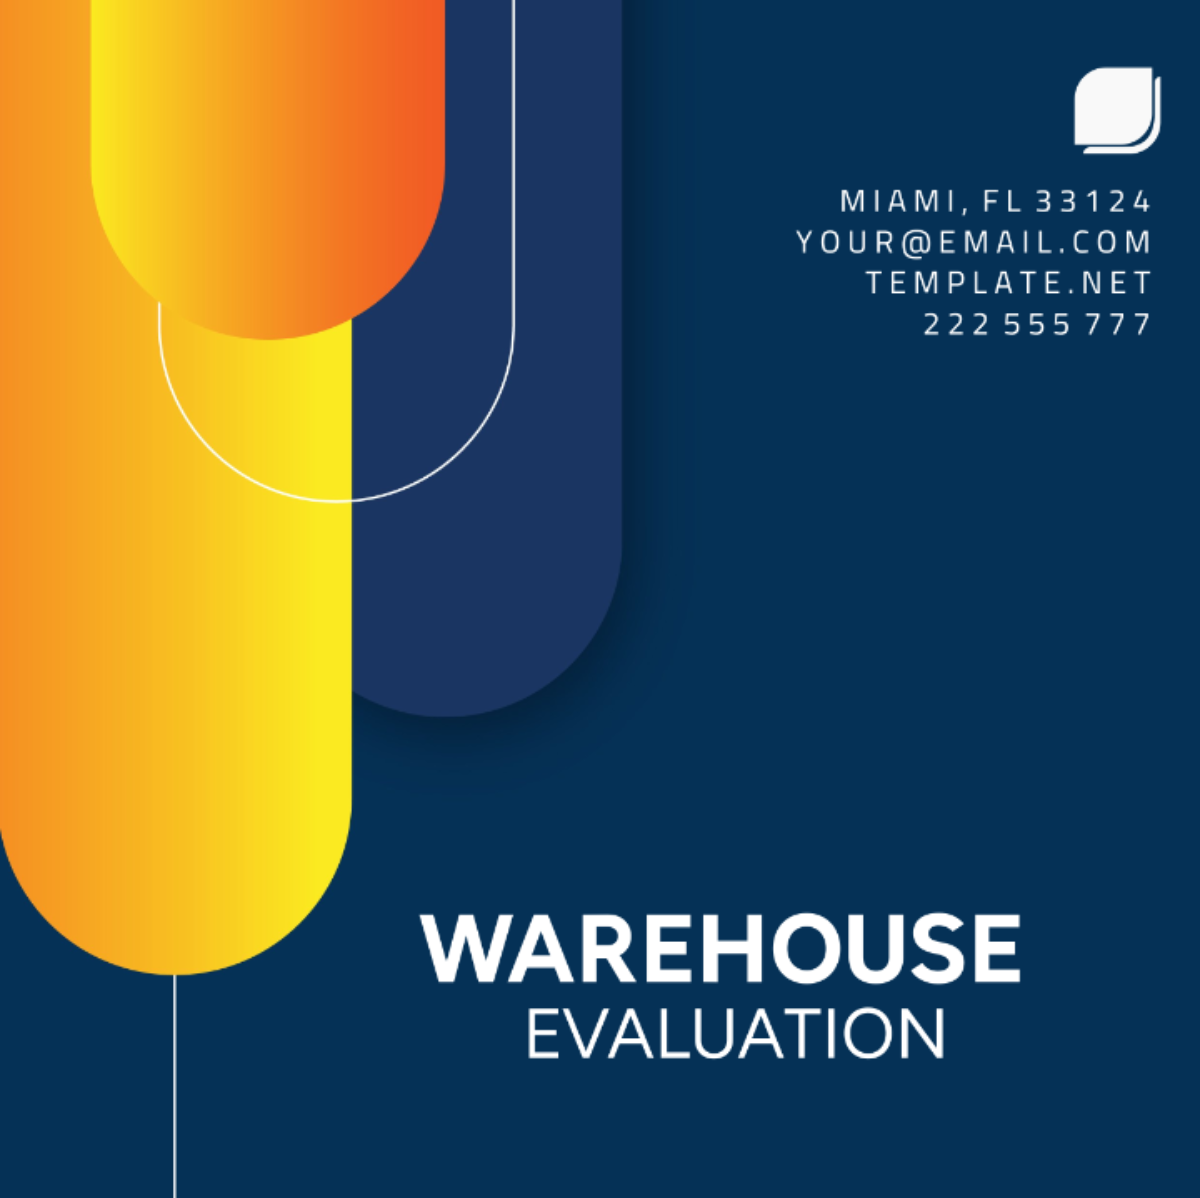 Warehouse Evaluation Template